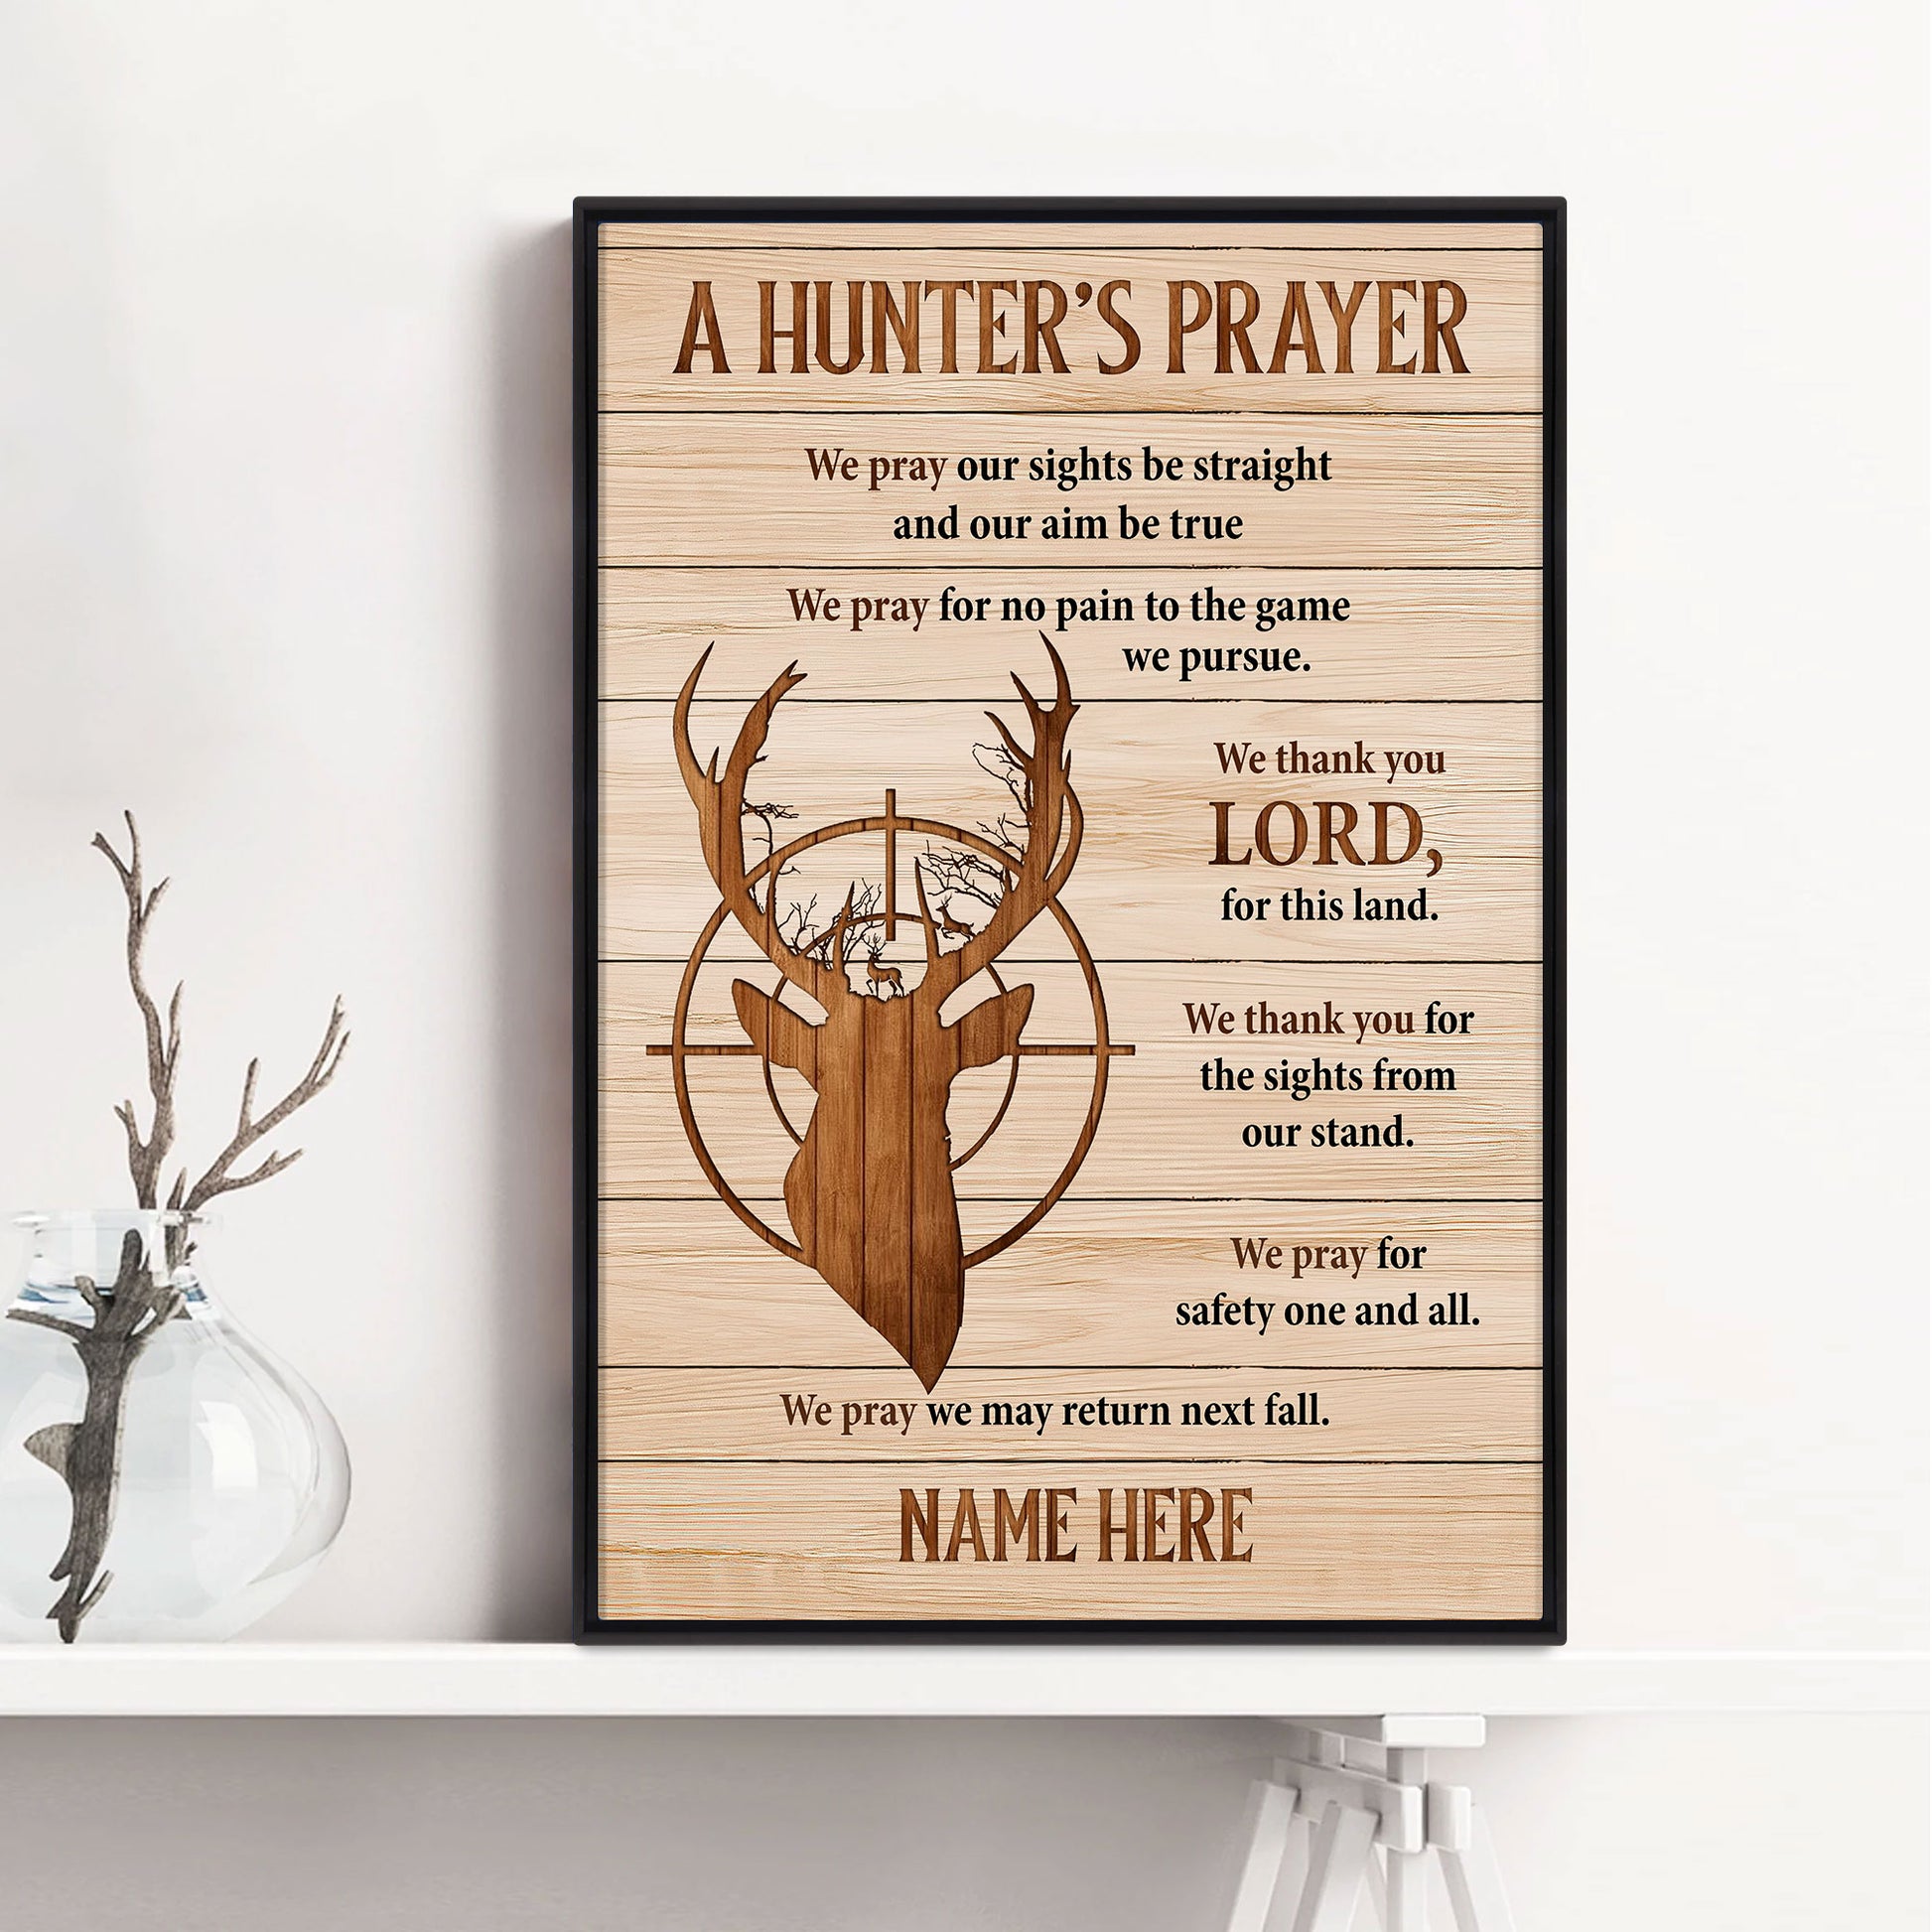 Personalized Hunting Poster & Canvas, A Hunter's Prayer Wall Art, Home